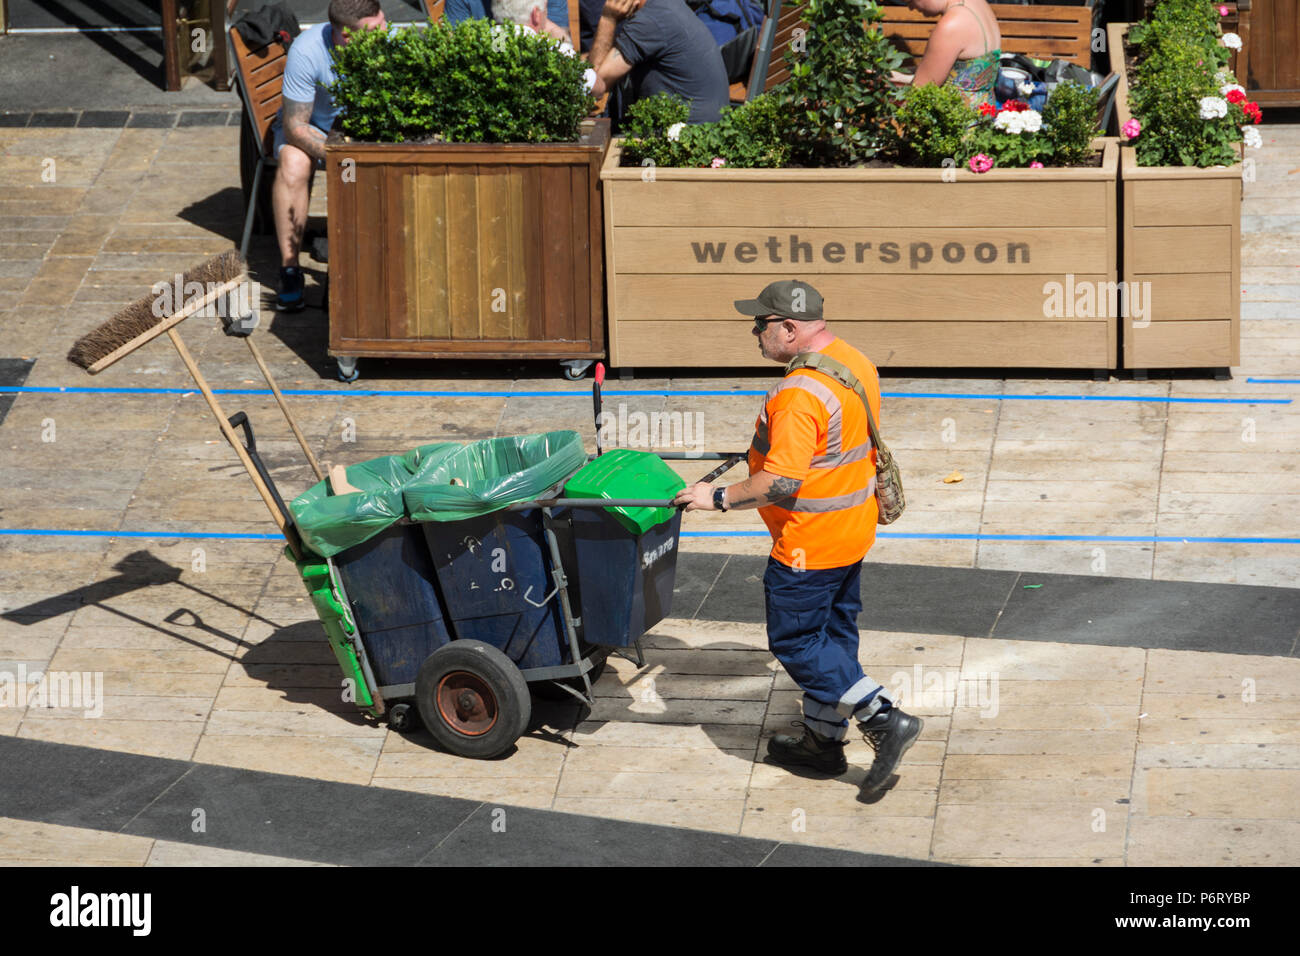 A street sweeper and his cart in front of a Weatherspoons pub in Hammersmith, London, W6, UK Stock Photo